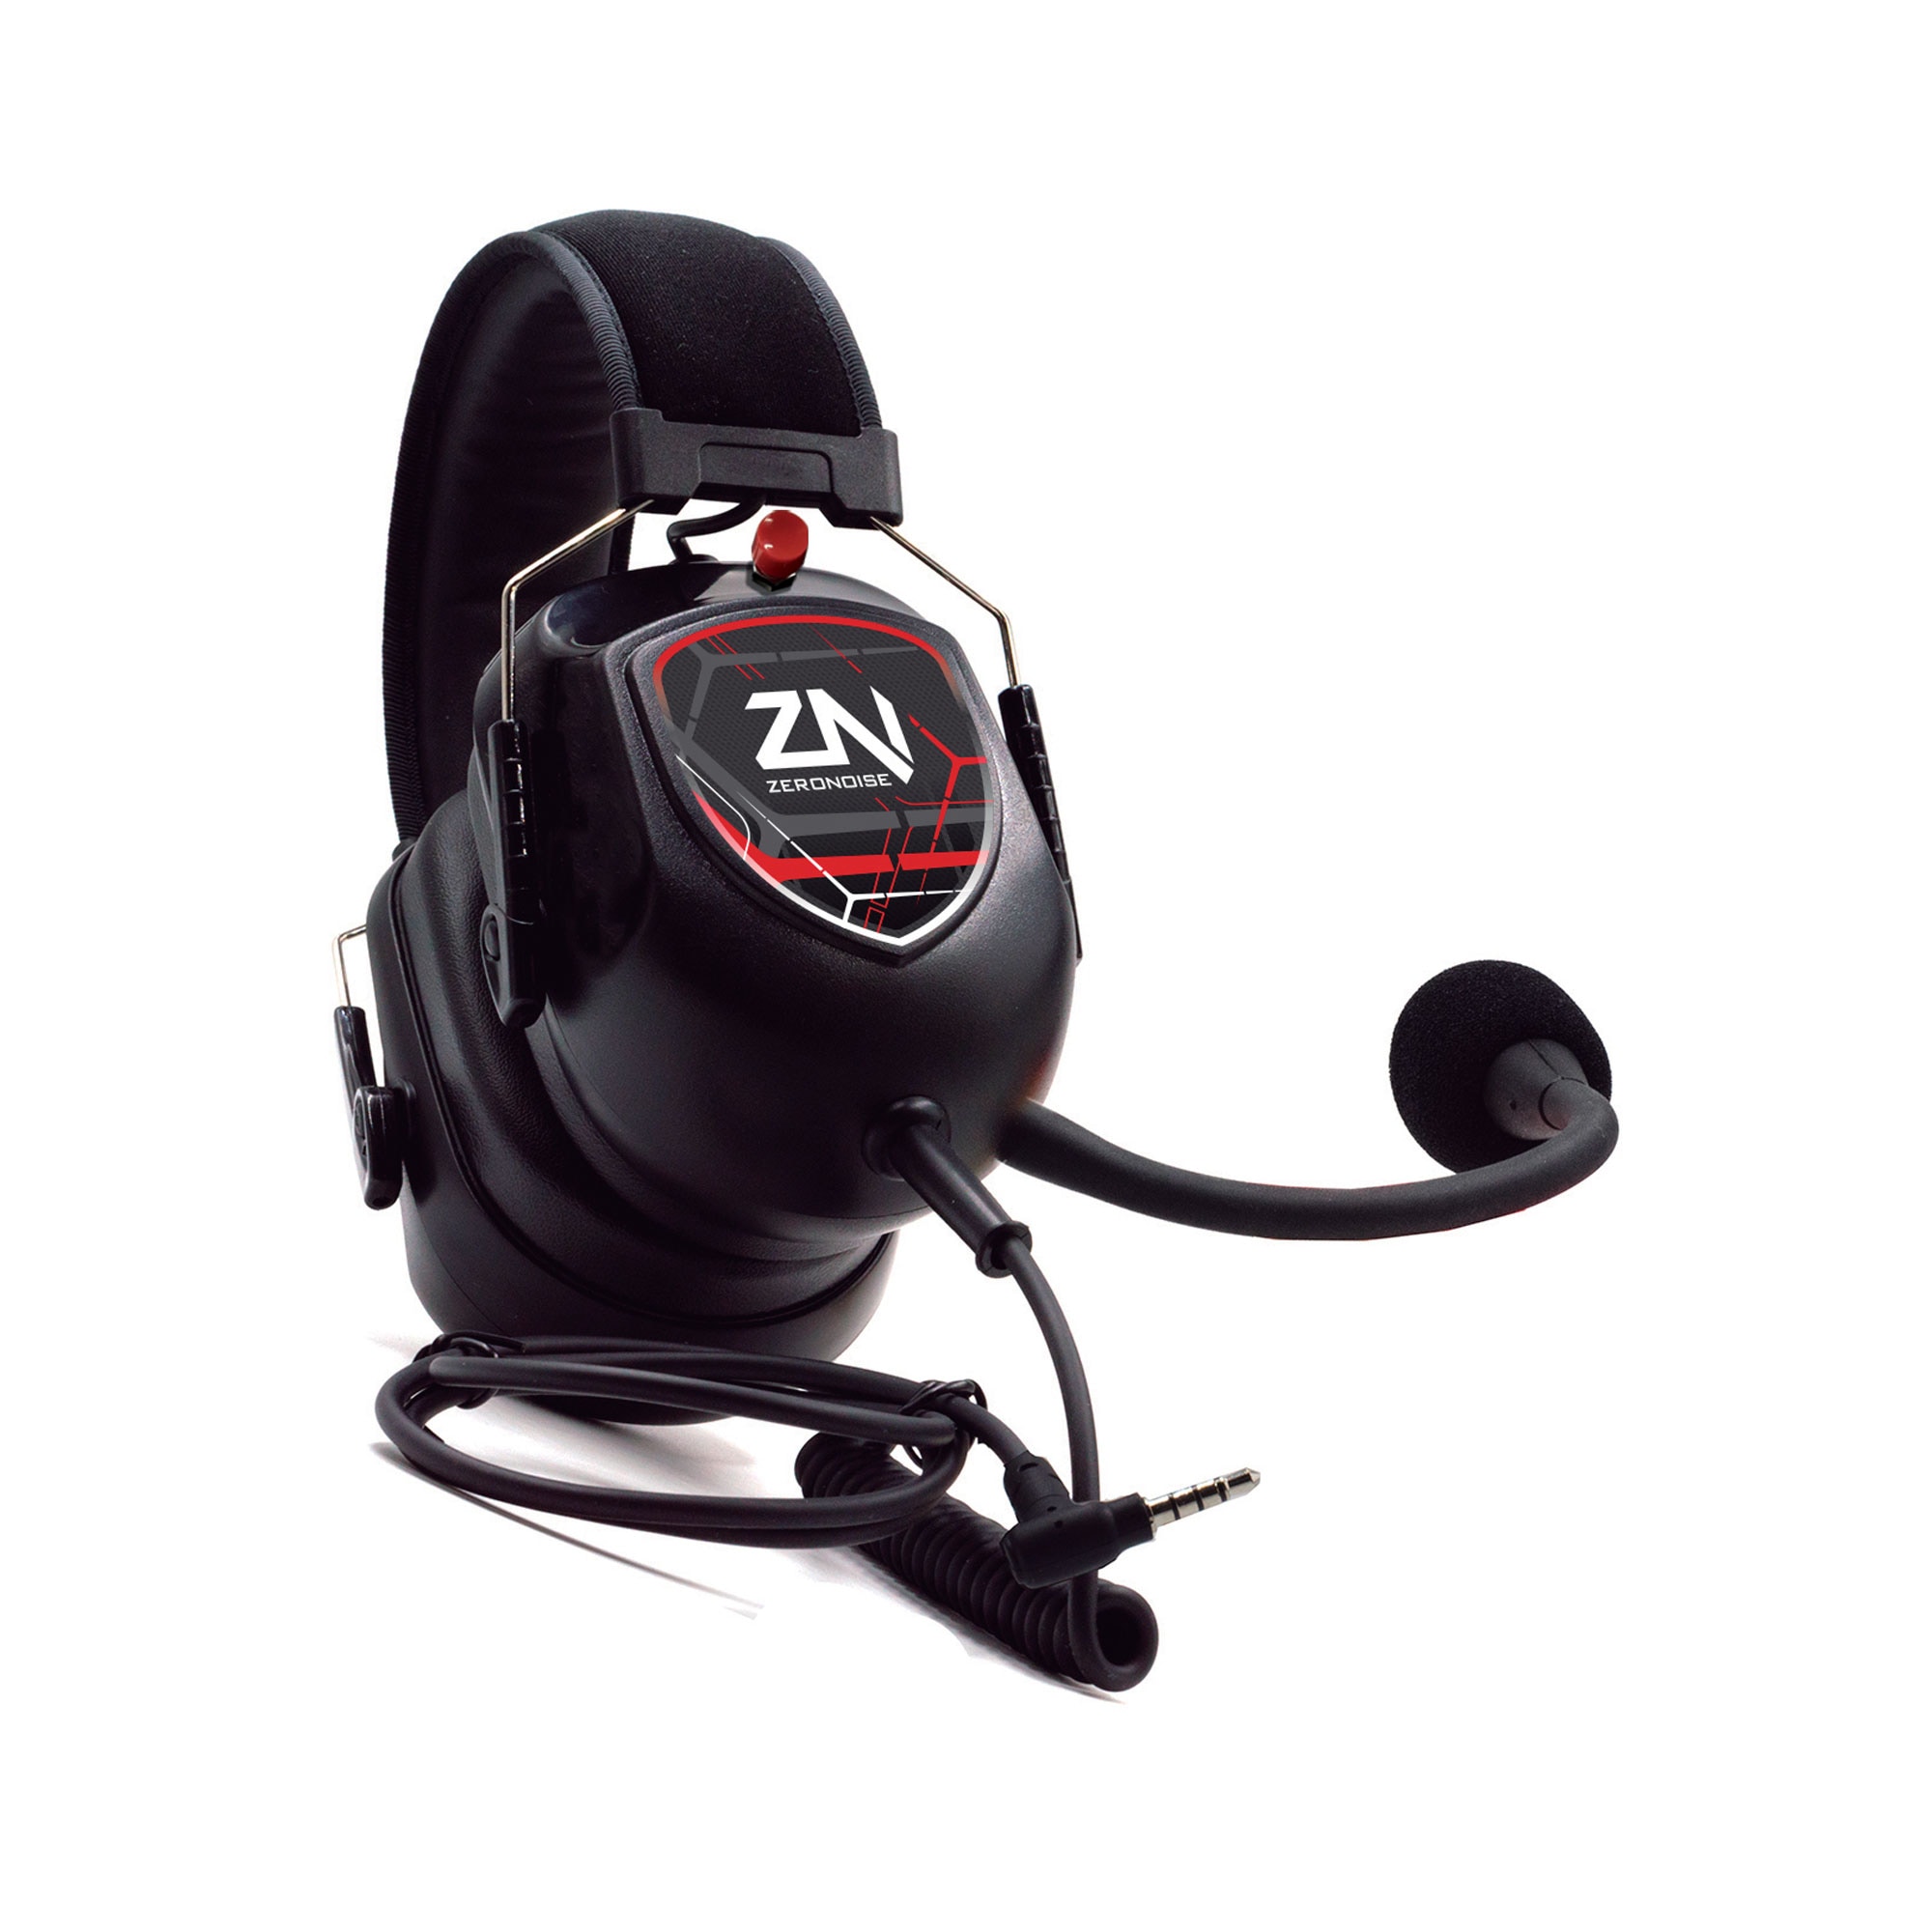 Pit Link Trainer ZN Professionel Karting Interom System (Android)